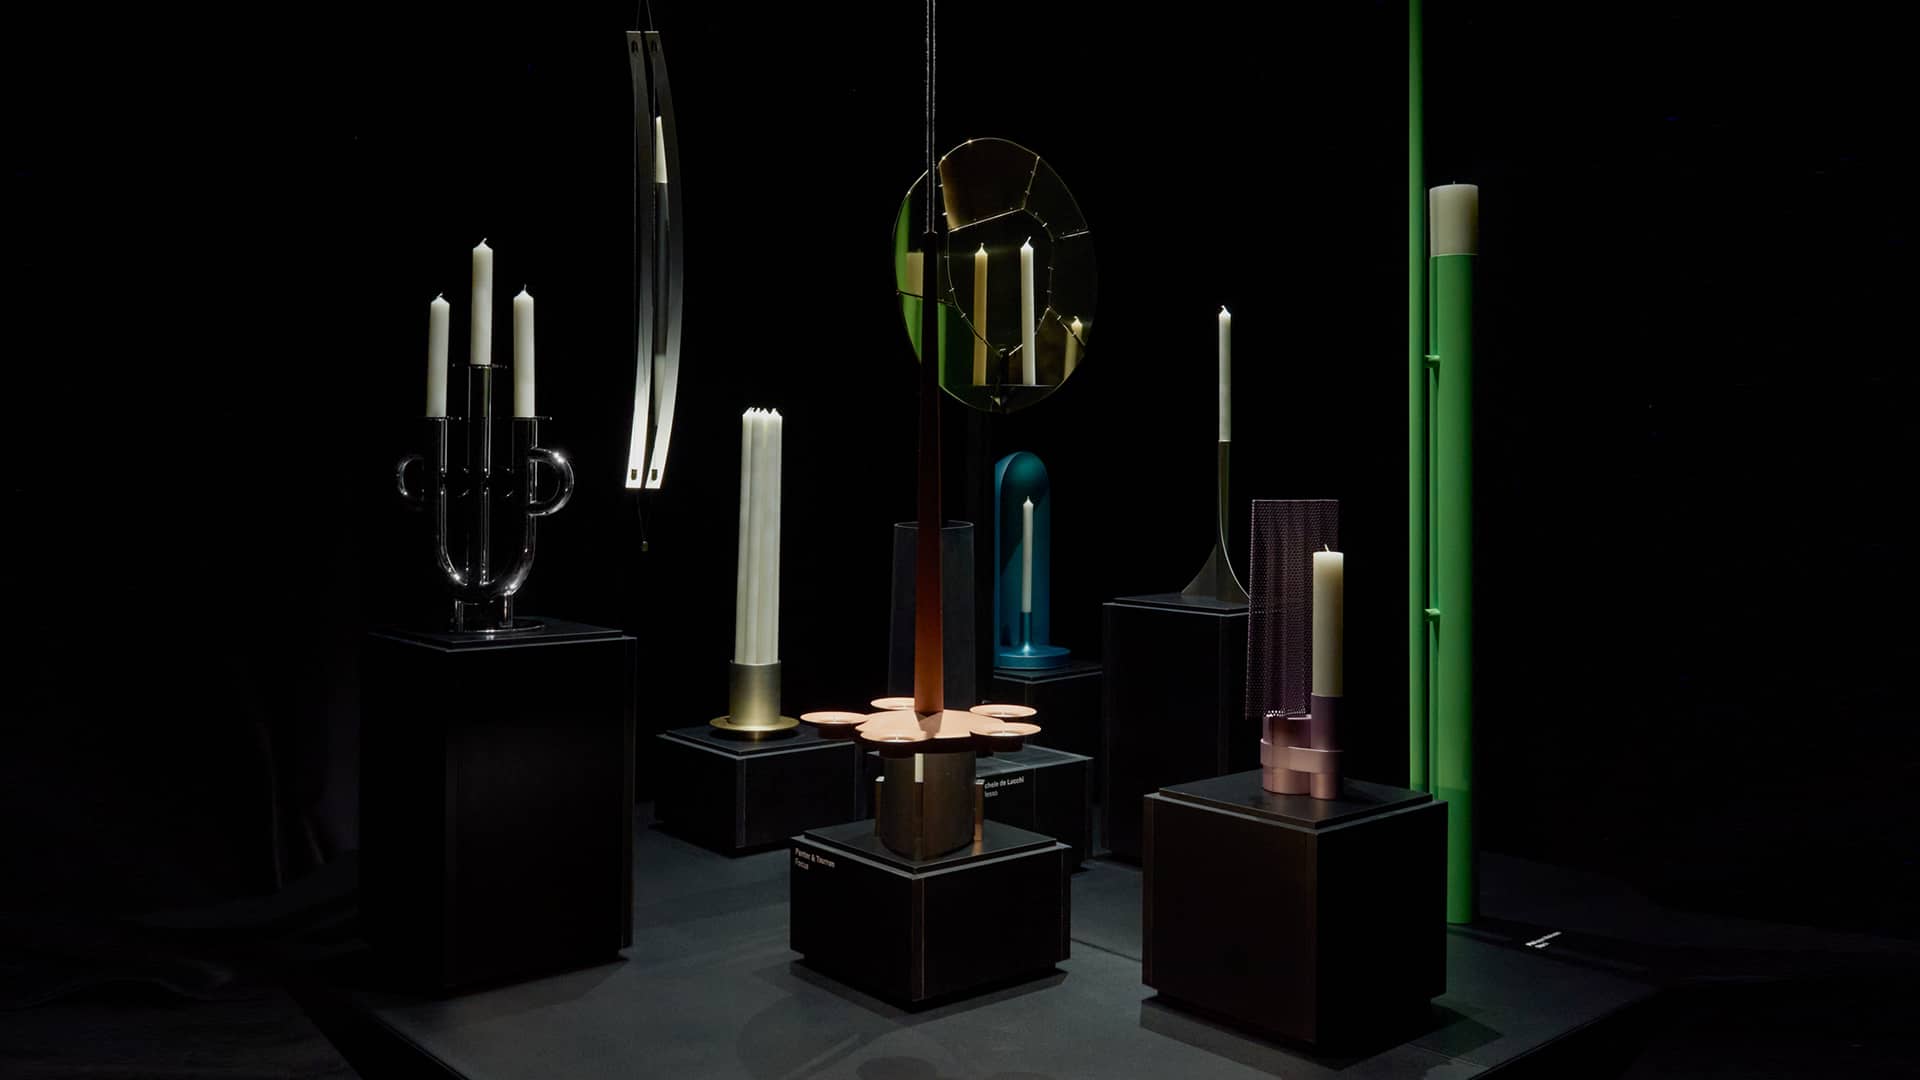 Marcel Wanders studio and Mingardo&nbsp;collaborate to raise funds for cancer